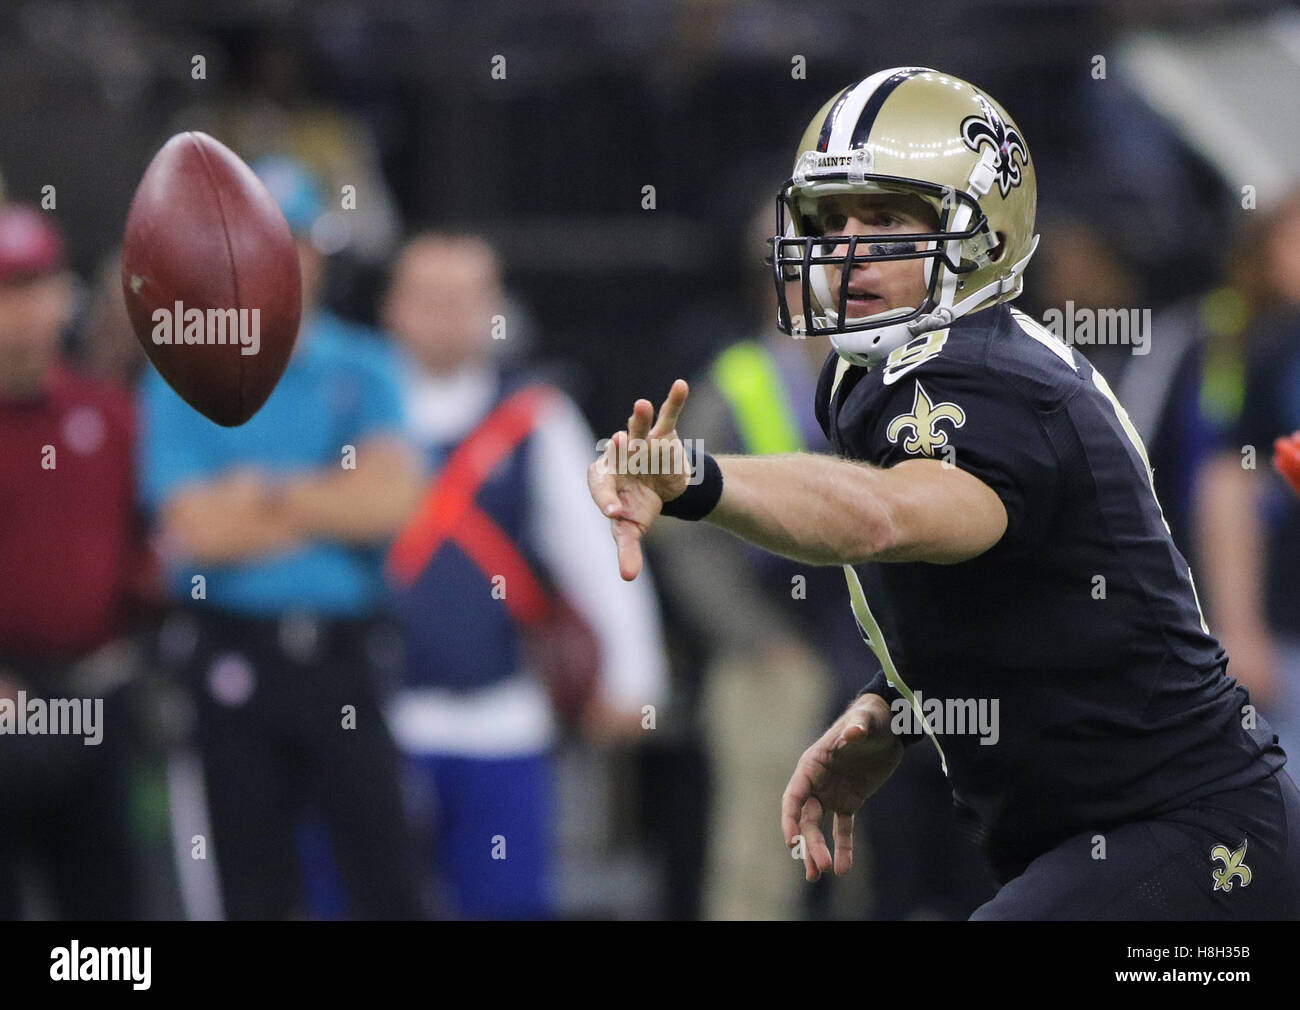 New Orleans, LOUISIANA, USA. 13th Nov, 2016. New Orleans Saints quarterback Drew Brees passes the ball against the Denver Broncos in a game at the Mercedes-Benz Superdome in New Orleans, Louisiana on November 13, 2016 © Dan Anderson/ZUMA Wire/Alamy Live News Stock Photo